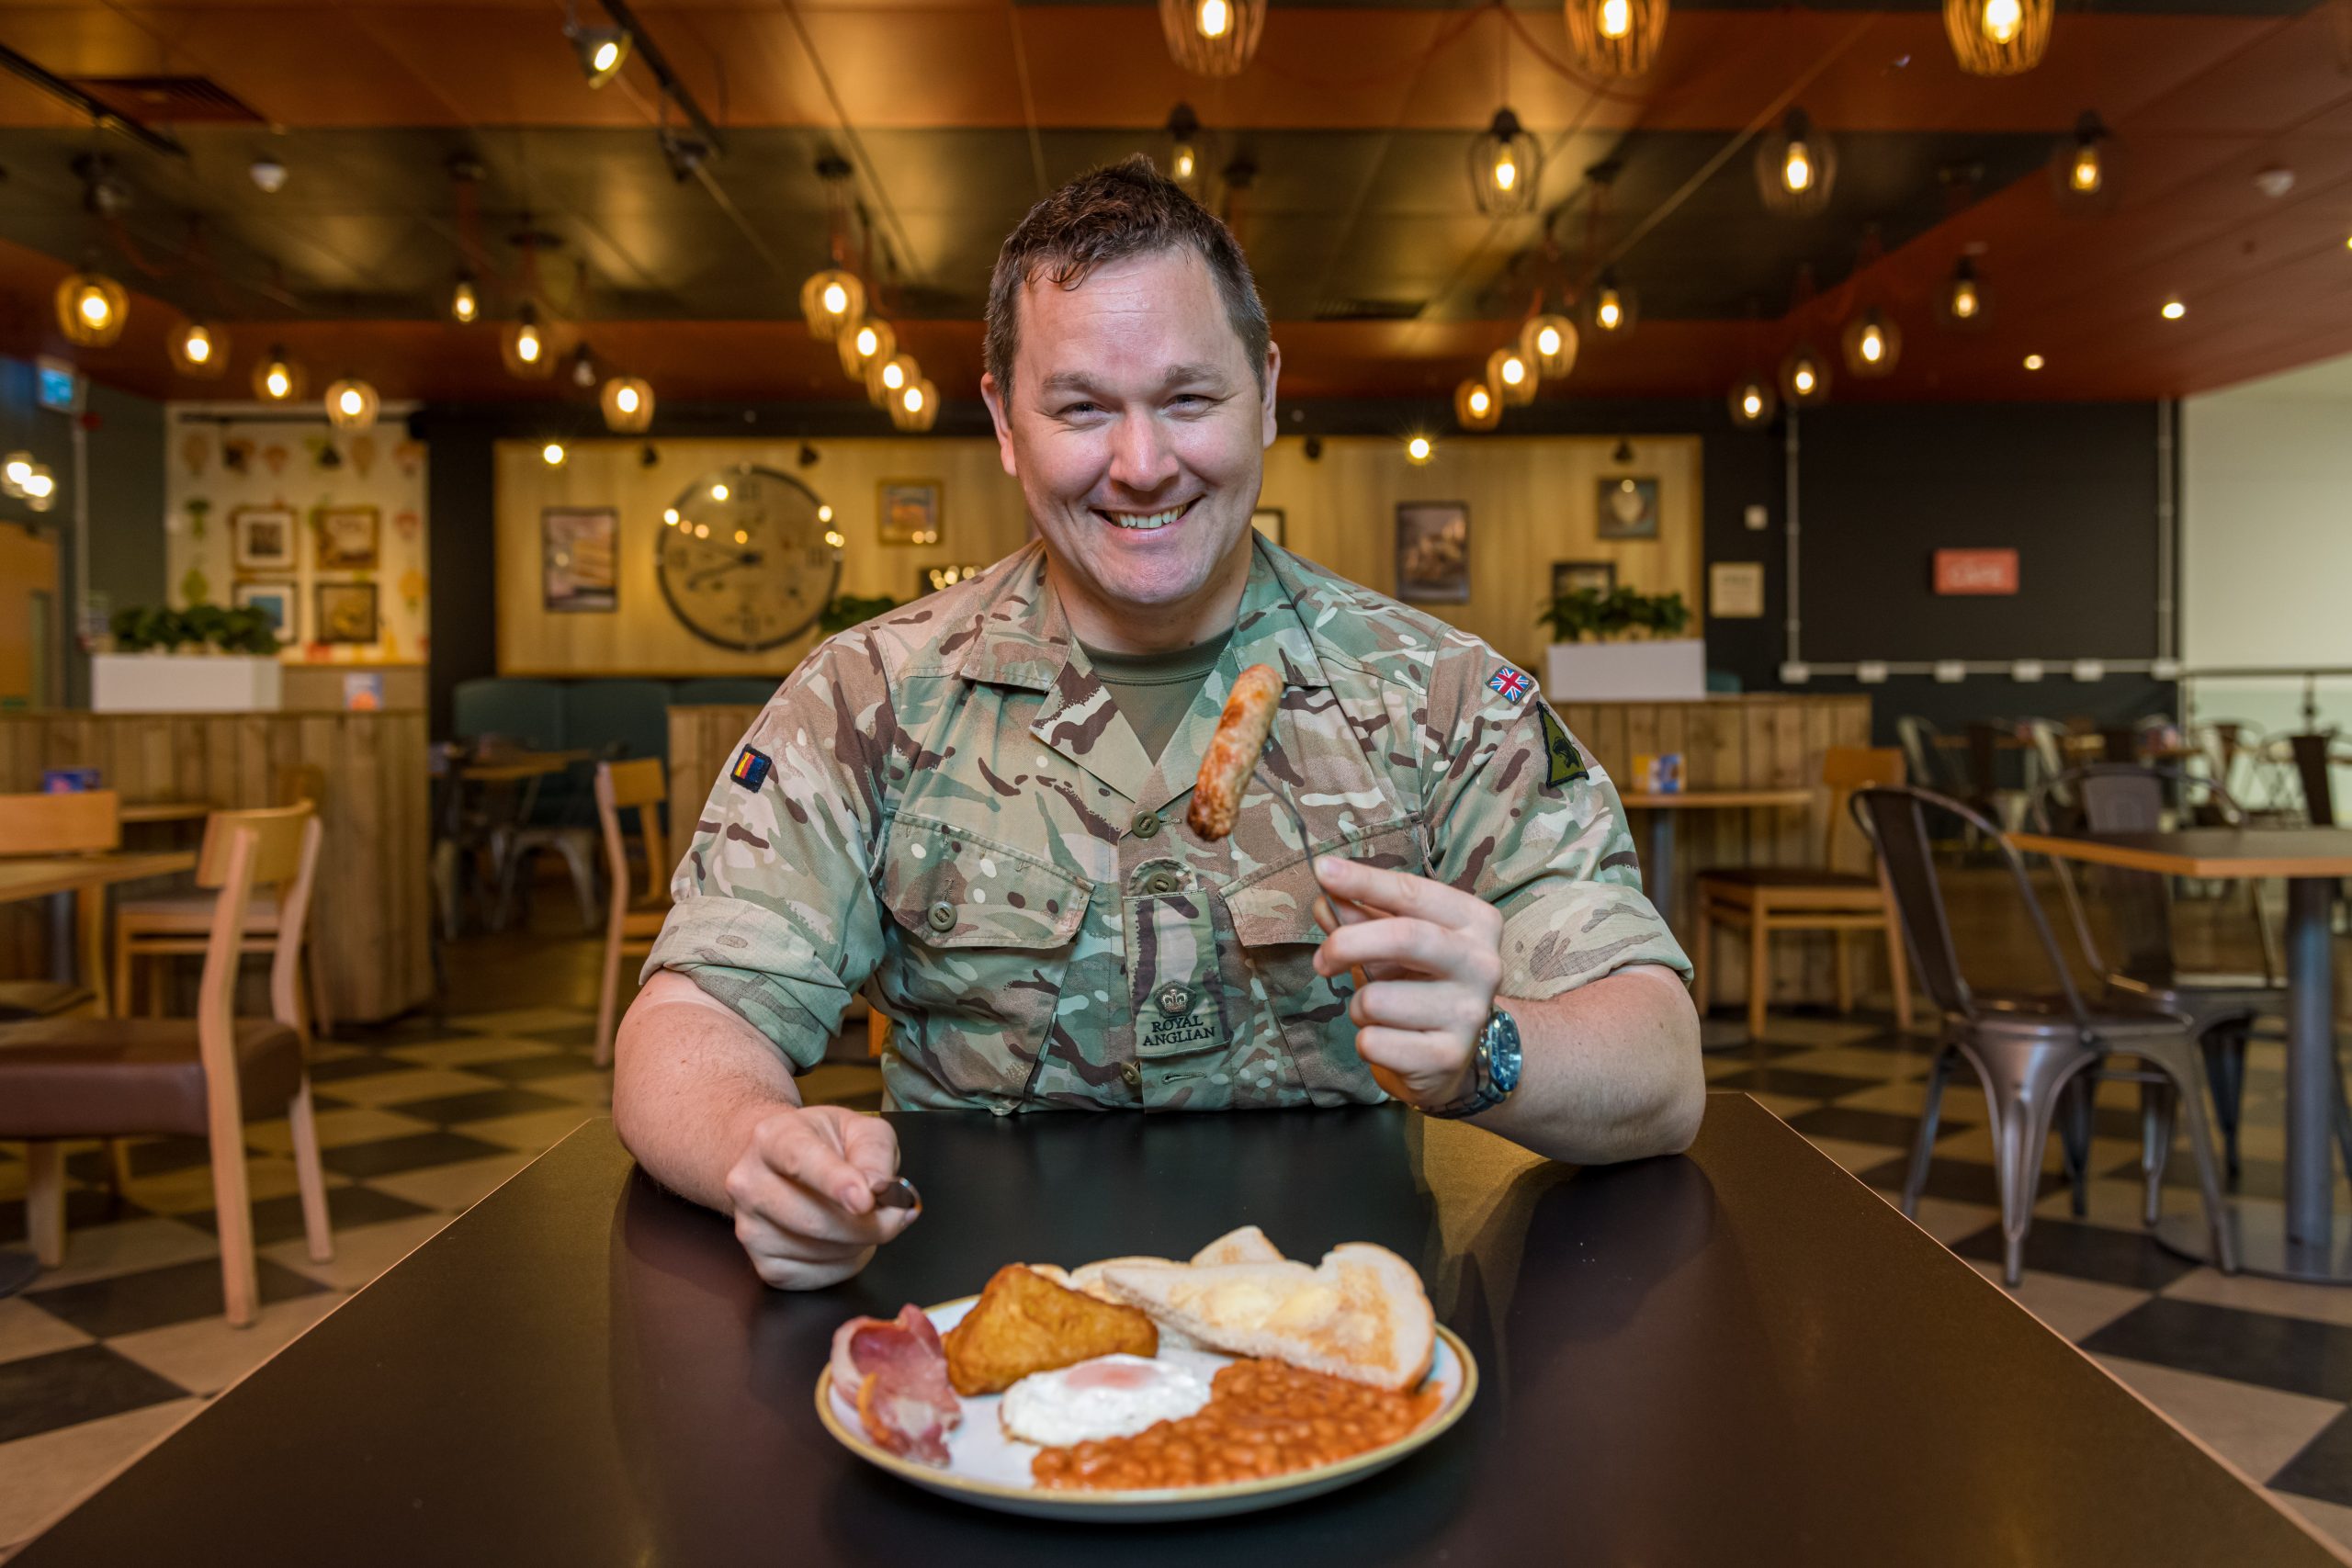 NEWS | Members of the Armed Forces will be able to get a free hot breakfast at Tesco Hereford café to mark the Armed Forces Week on Sunday